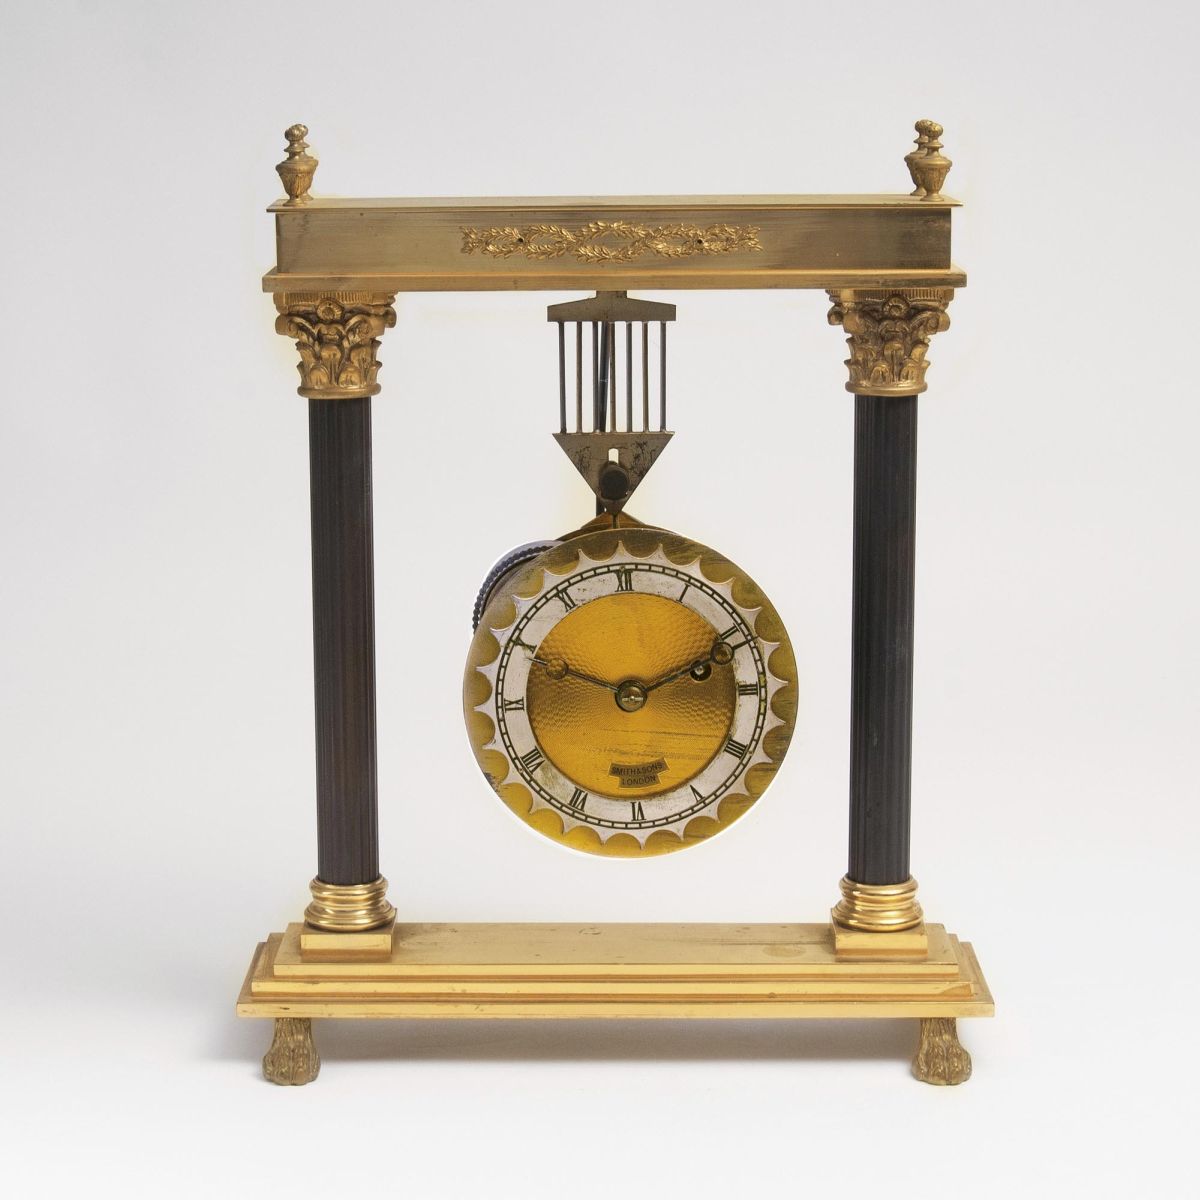 A Portico Mantle Clock with Cantilever Pendulum